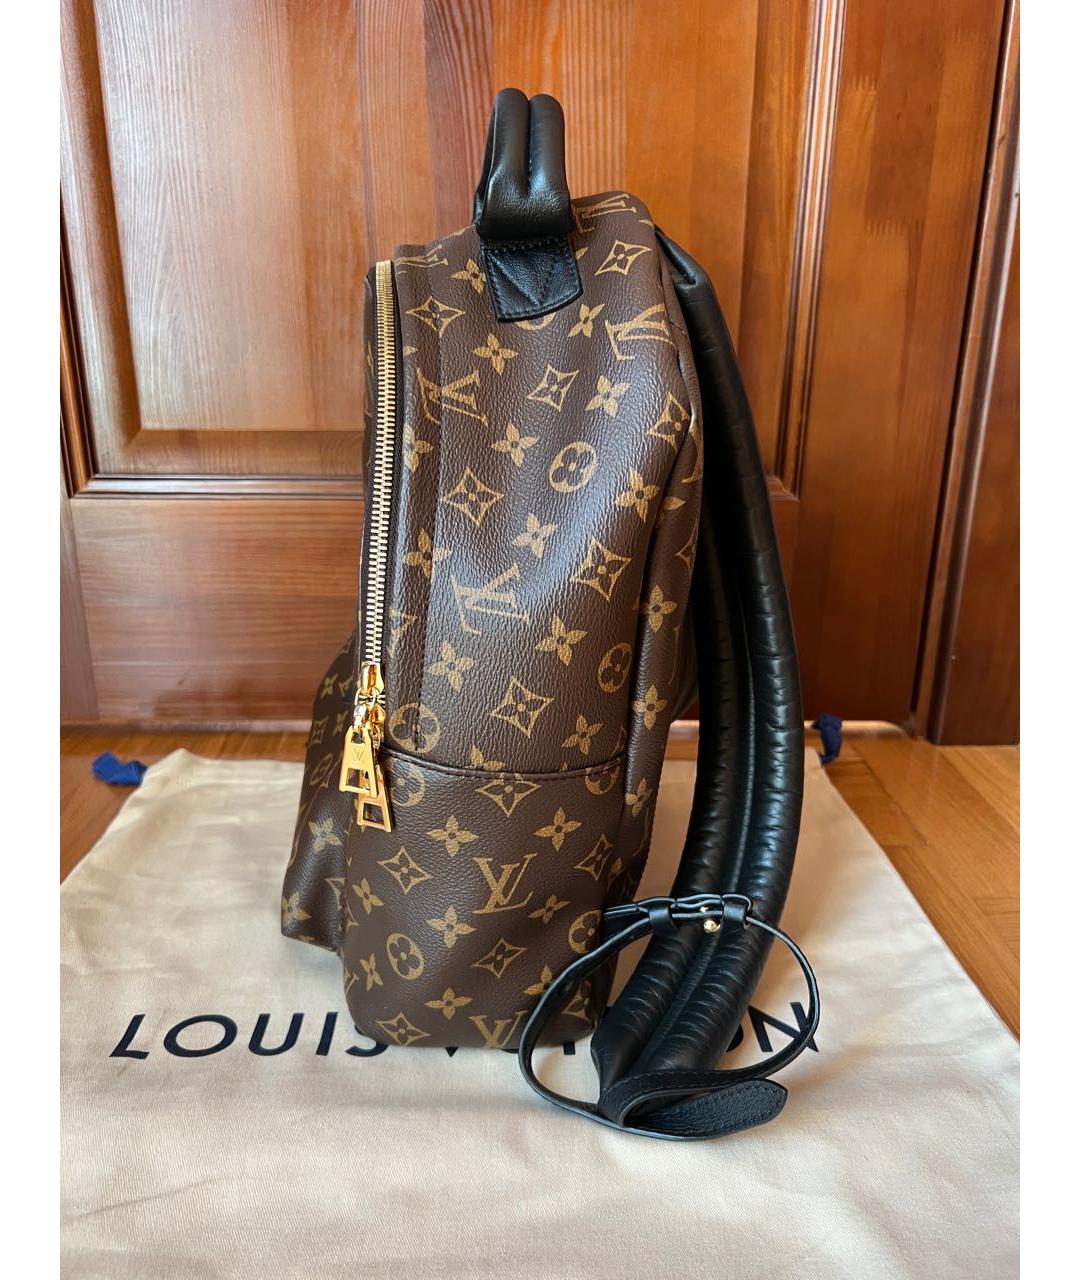 LOUIS VUITTON PRE-OWNED Мульти рюкзак, фото 2